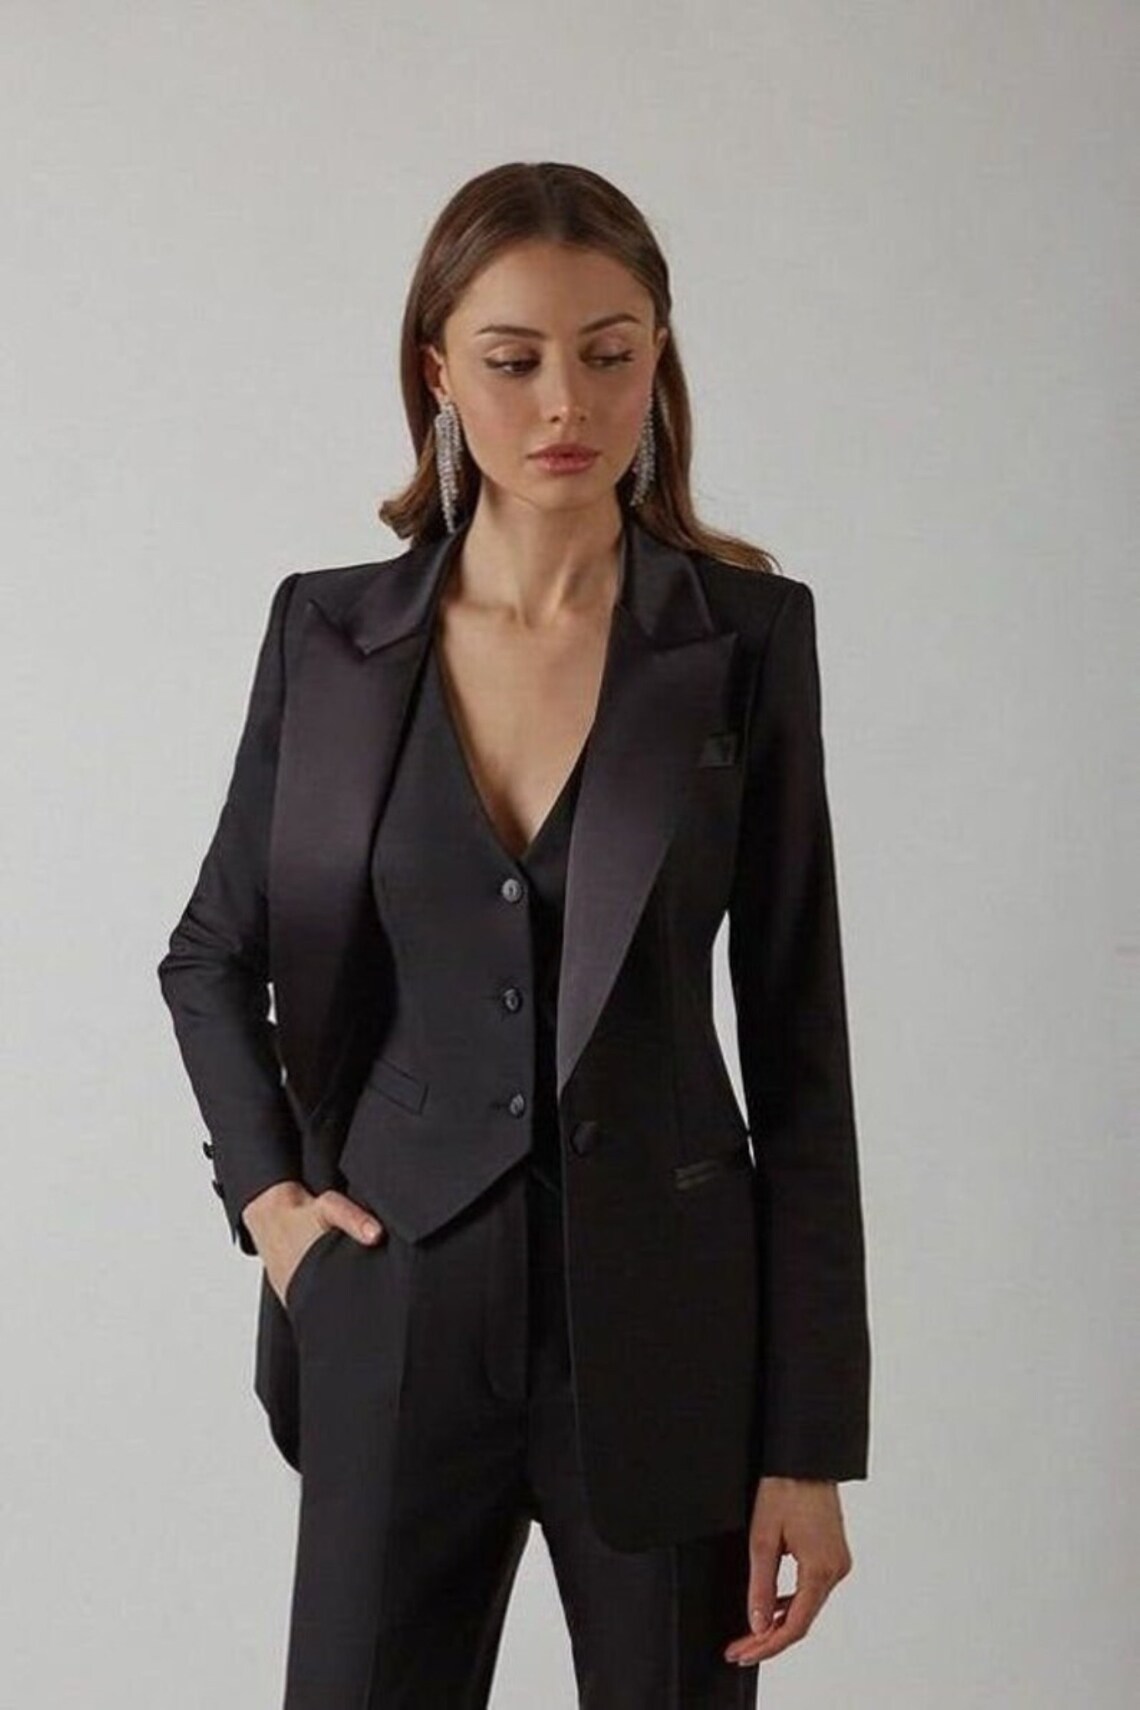 Women Three Piece Suit With Satin Lapel in Black Color/black - Etsy